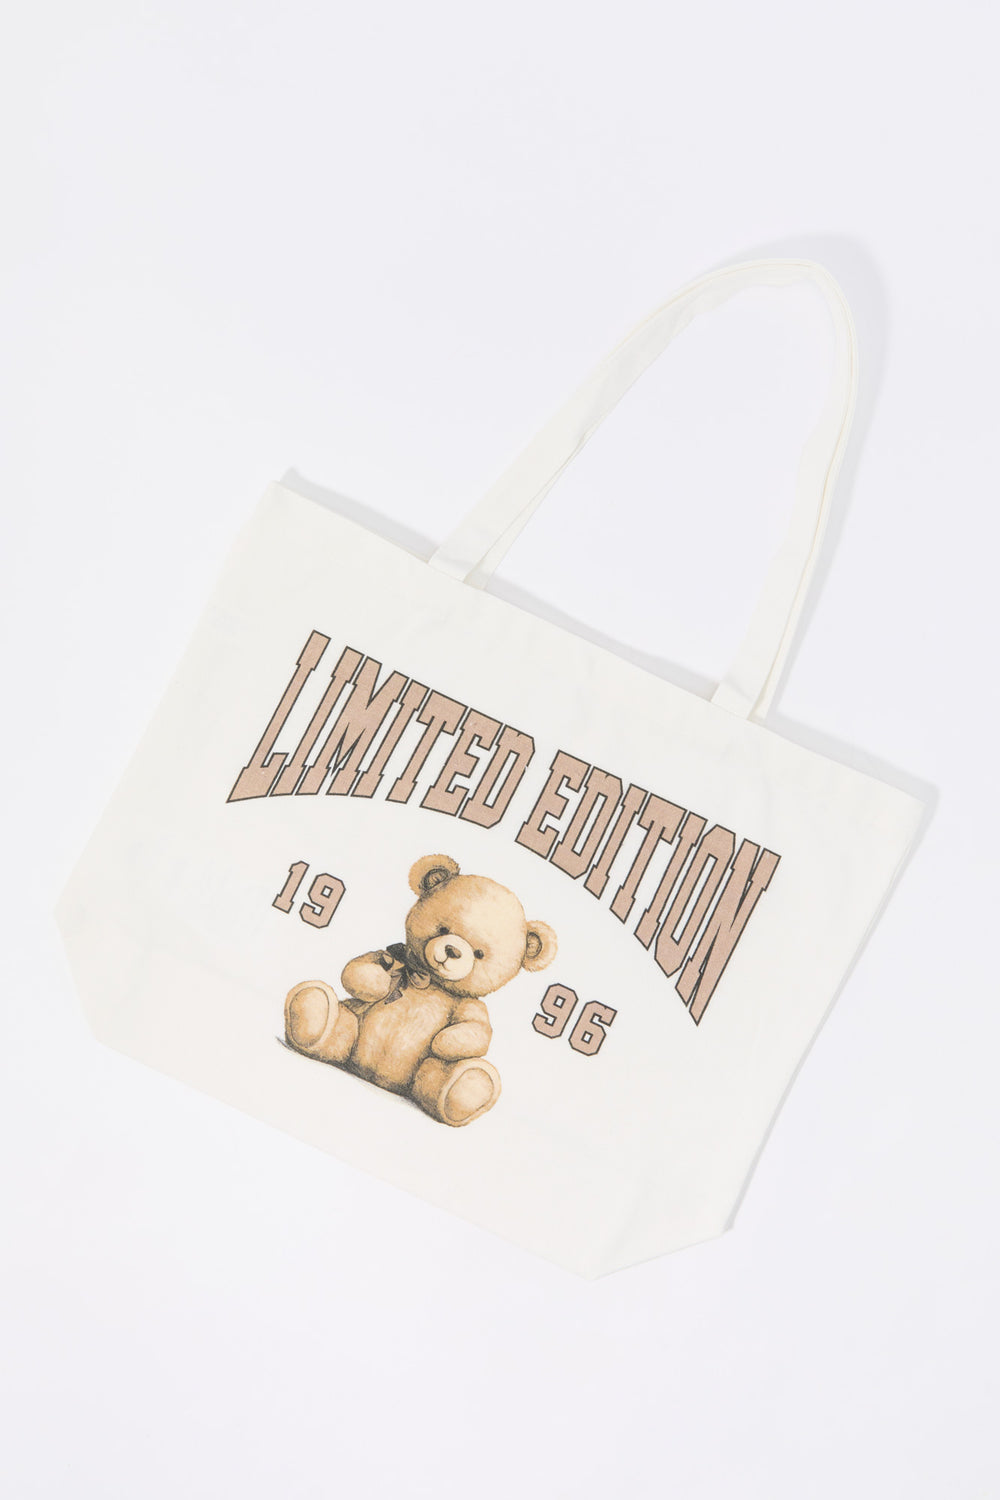 Limited Edition Graphic Tote Bag Limited Edition Graphic Tote Bag 1